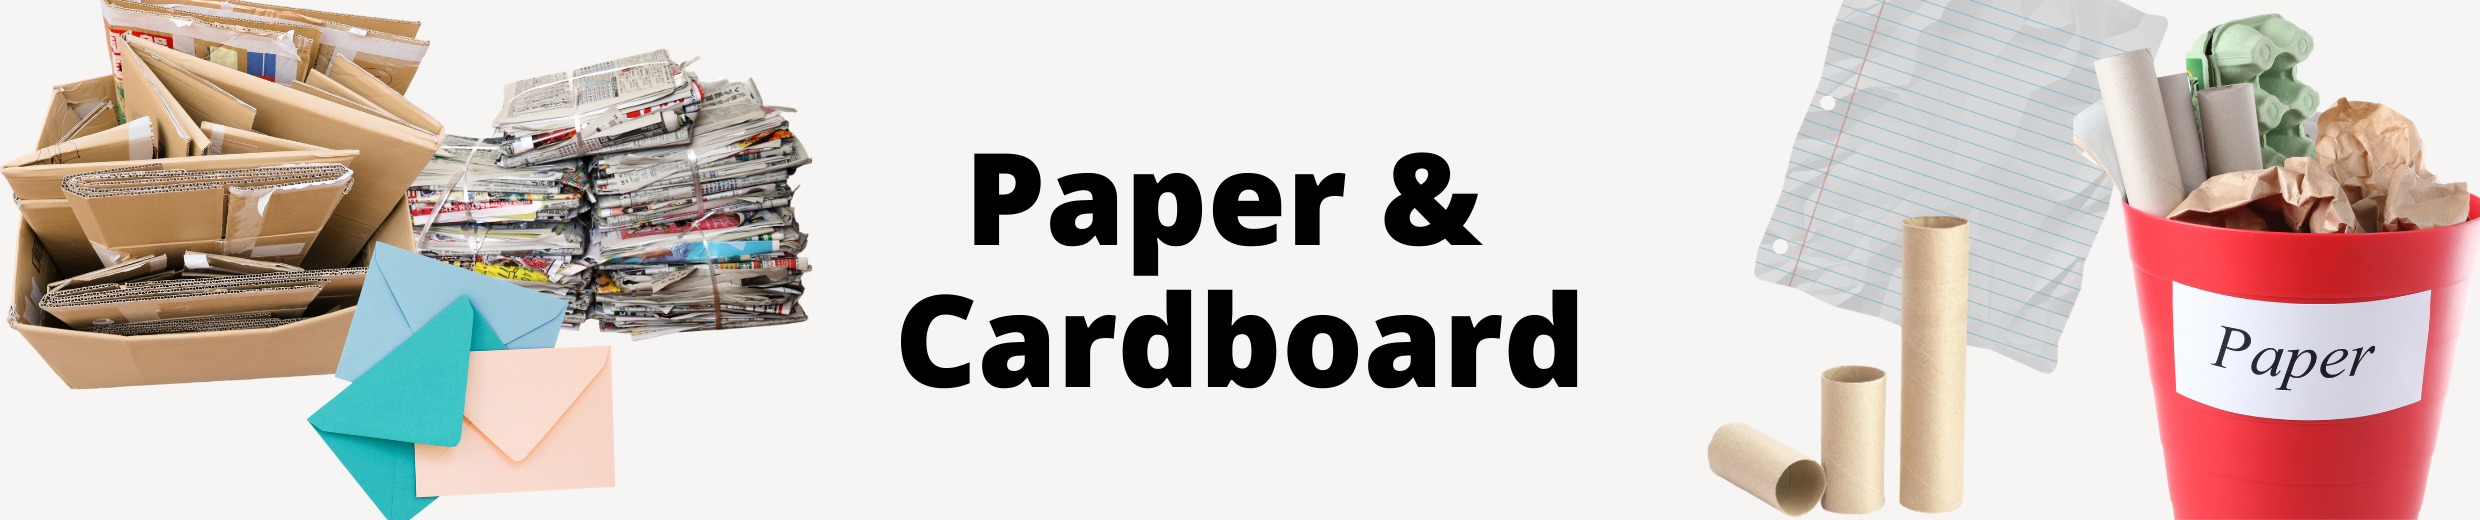 Paper and Cardboard